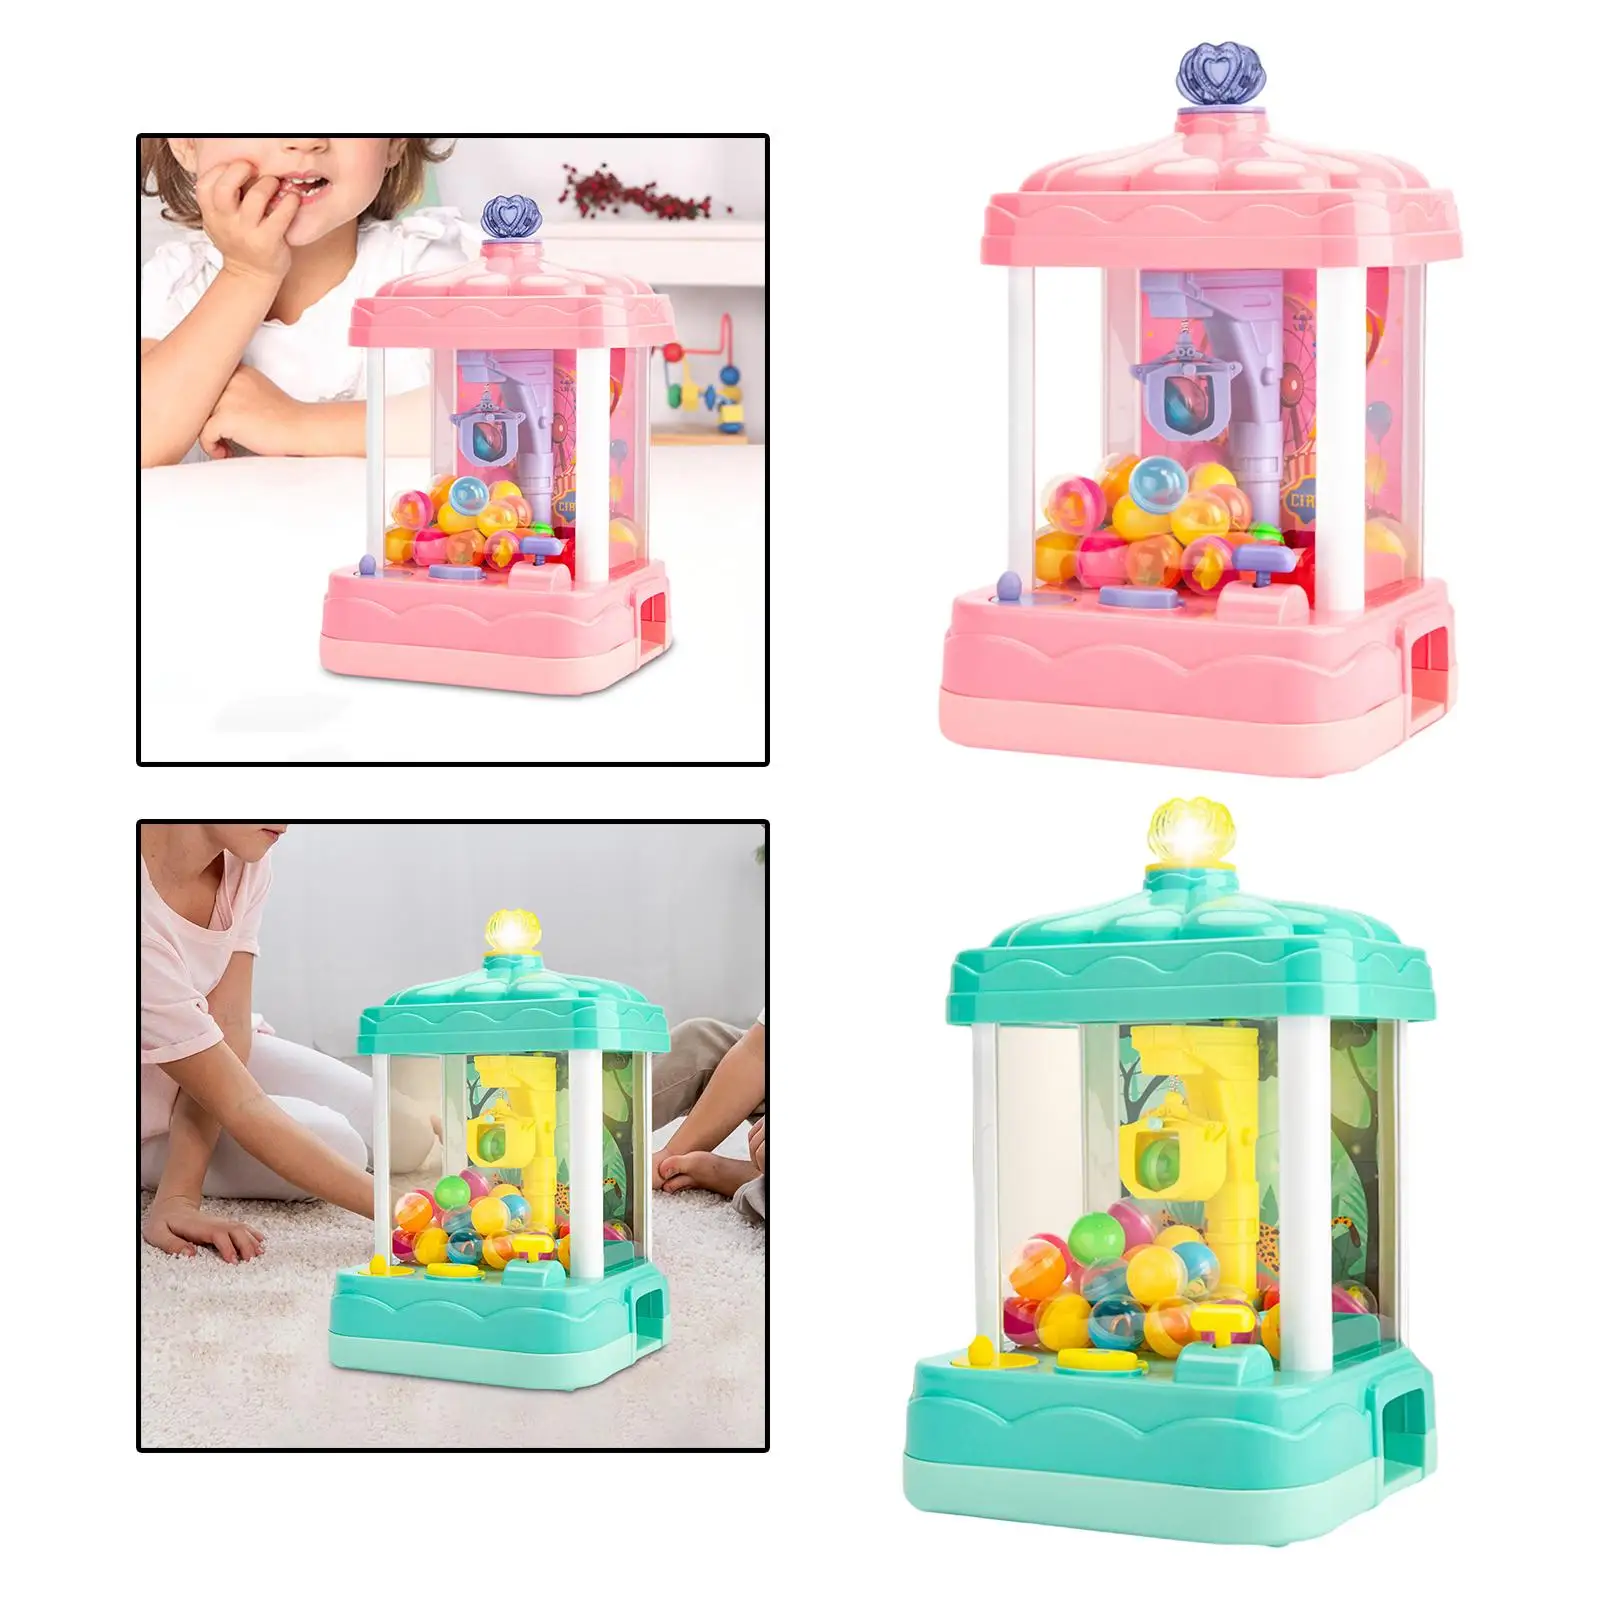 Mini Claw Machine Intelligent System with Music and Lighting Coin Operated Play Game Doll Machine Claw Catch Toy for Children